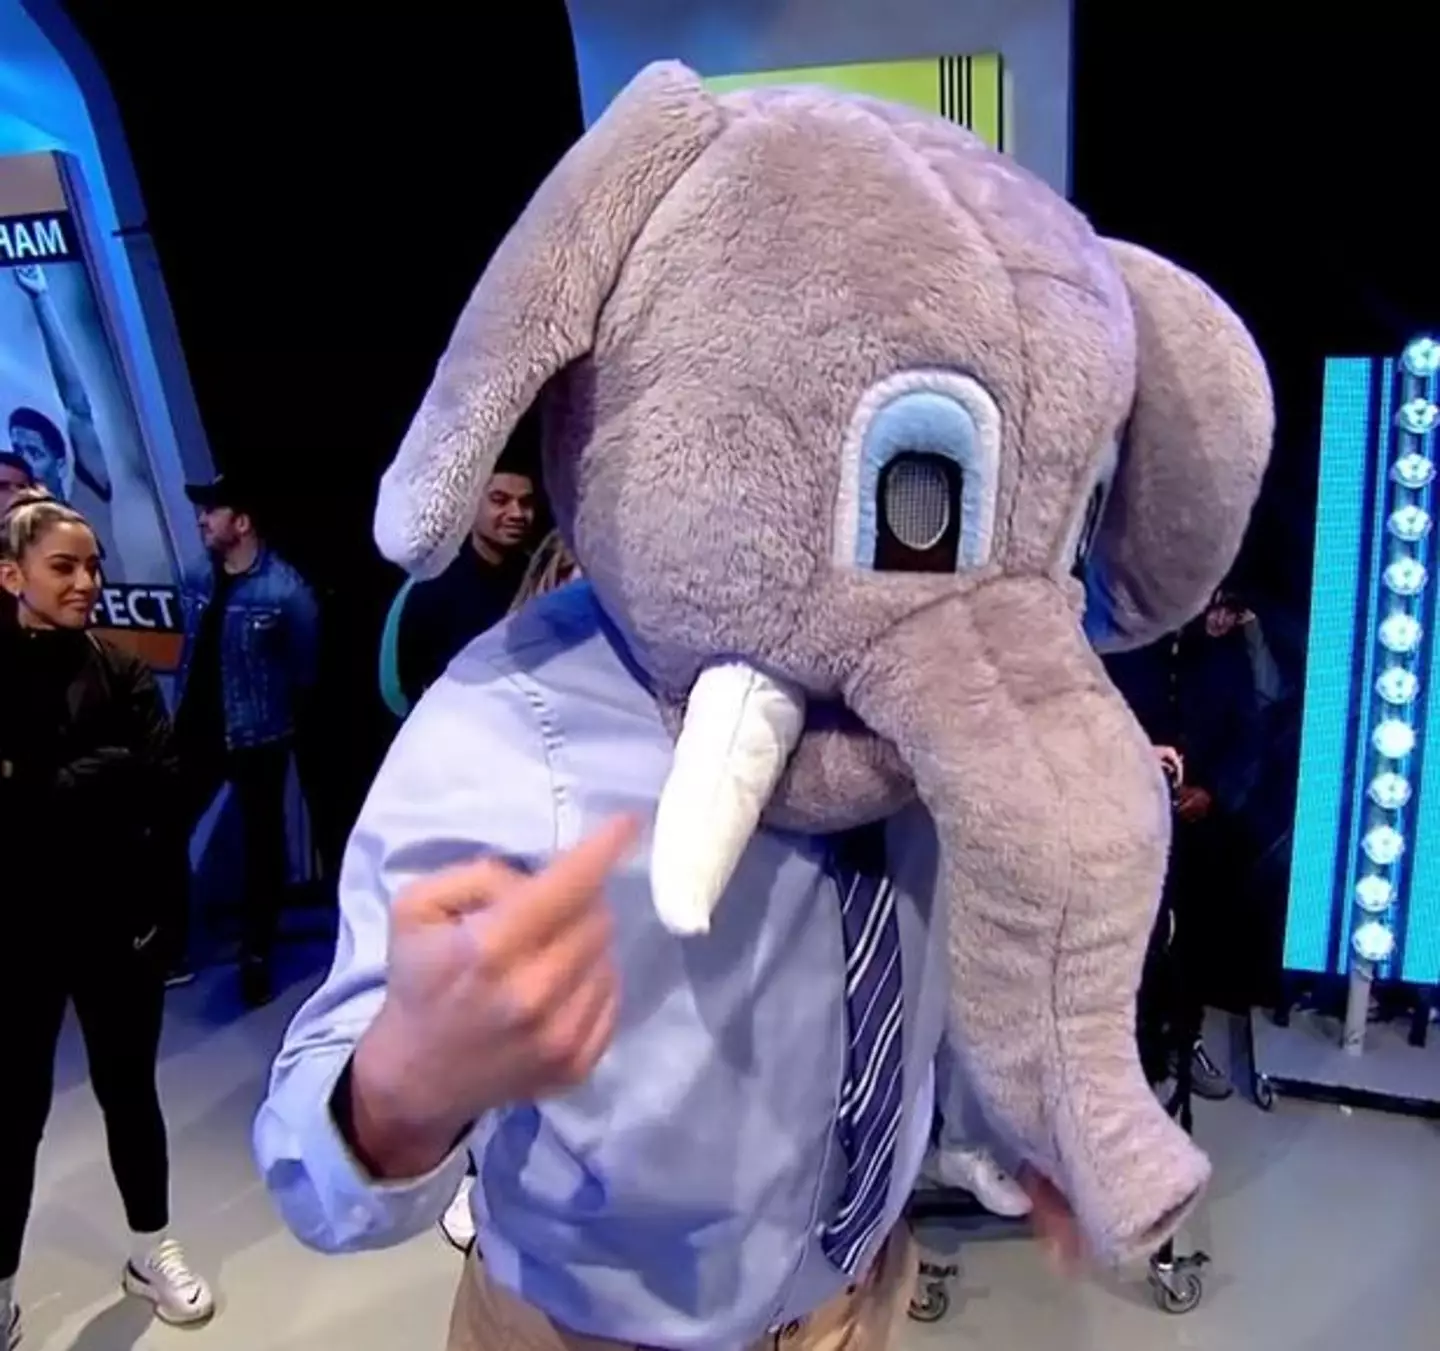 Yes, it's a man in an elephant suit.